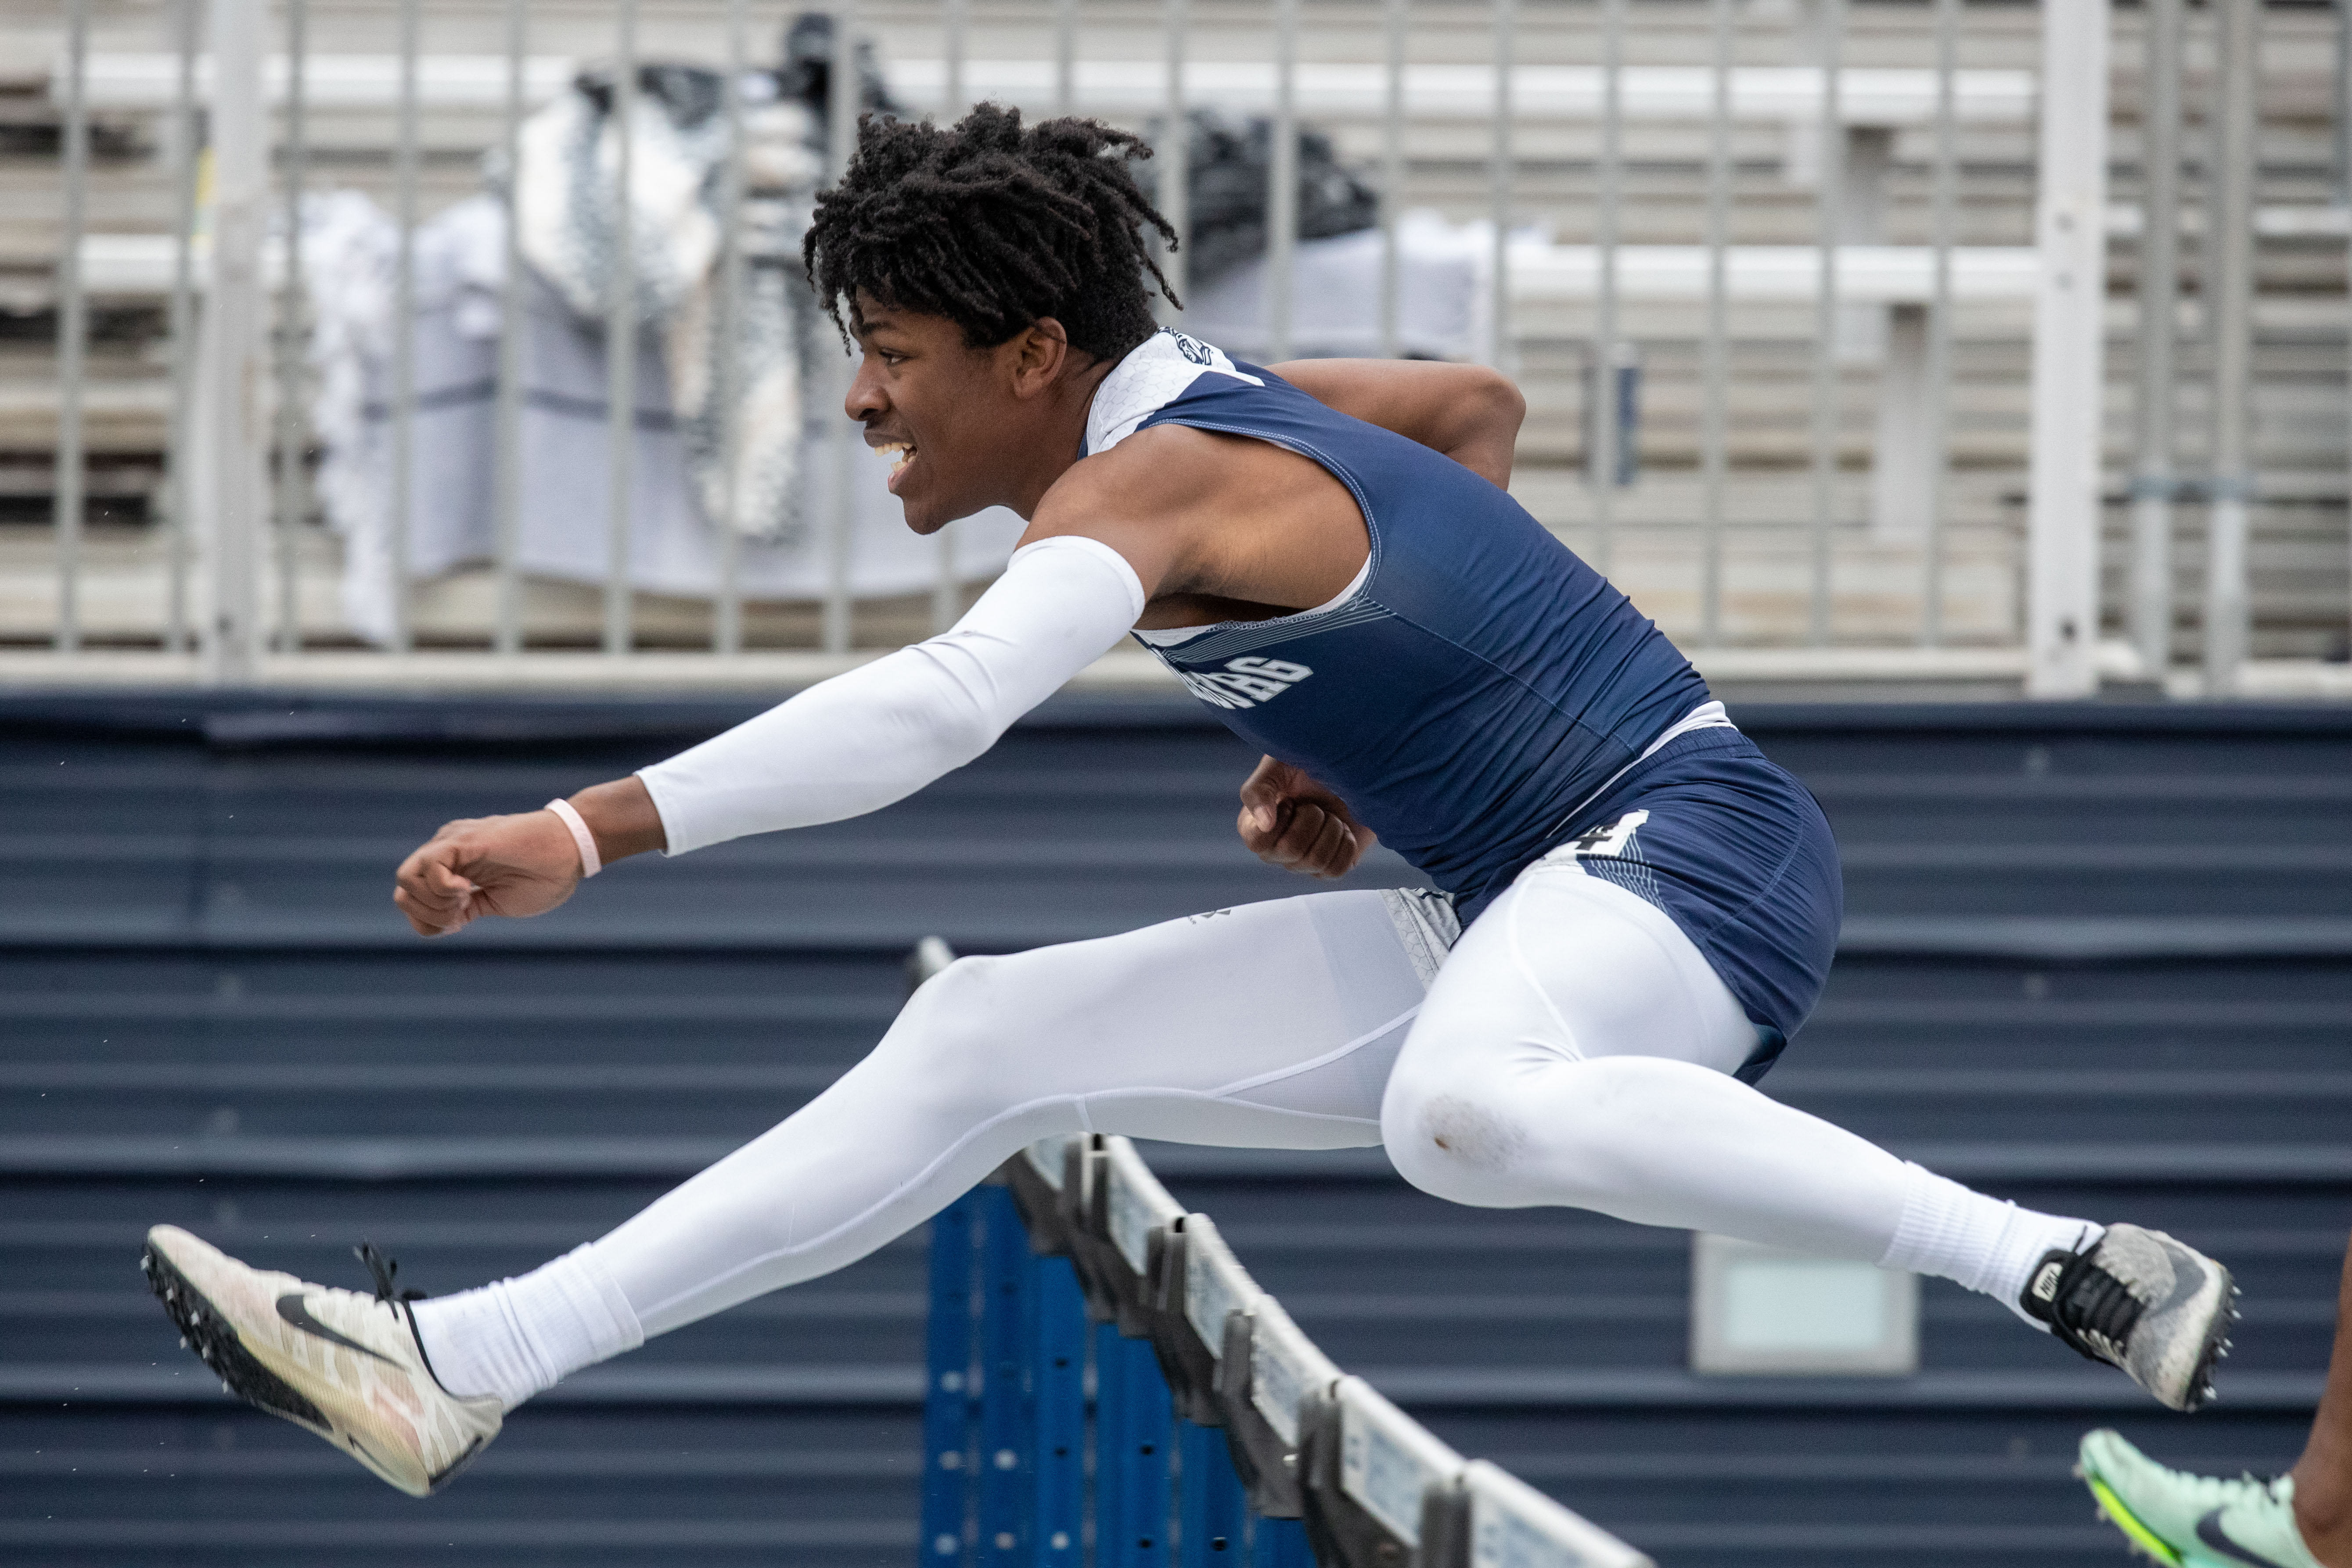 Jermere Jones, Chambersburg, wins the 110m hurdles in a time of 15.43, at the 2023 Tim Cook Memorial Invitational track & field meet at Chambersburg, Pa., Mar. 25, 2023.Mark Pynes | pennlive.com